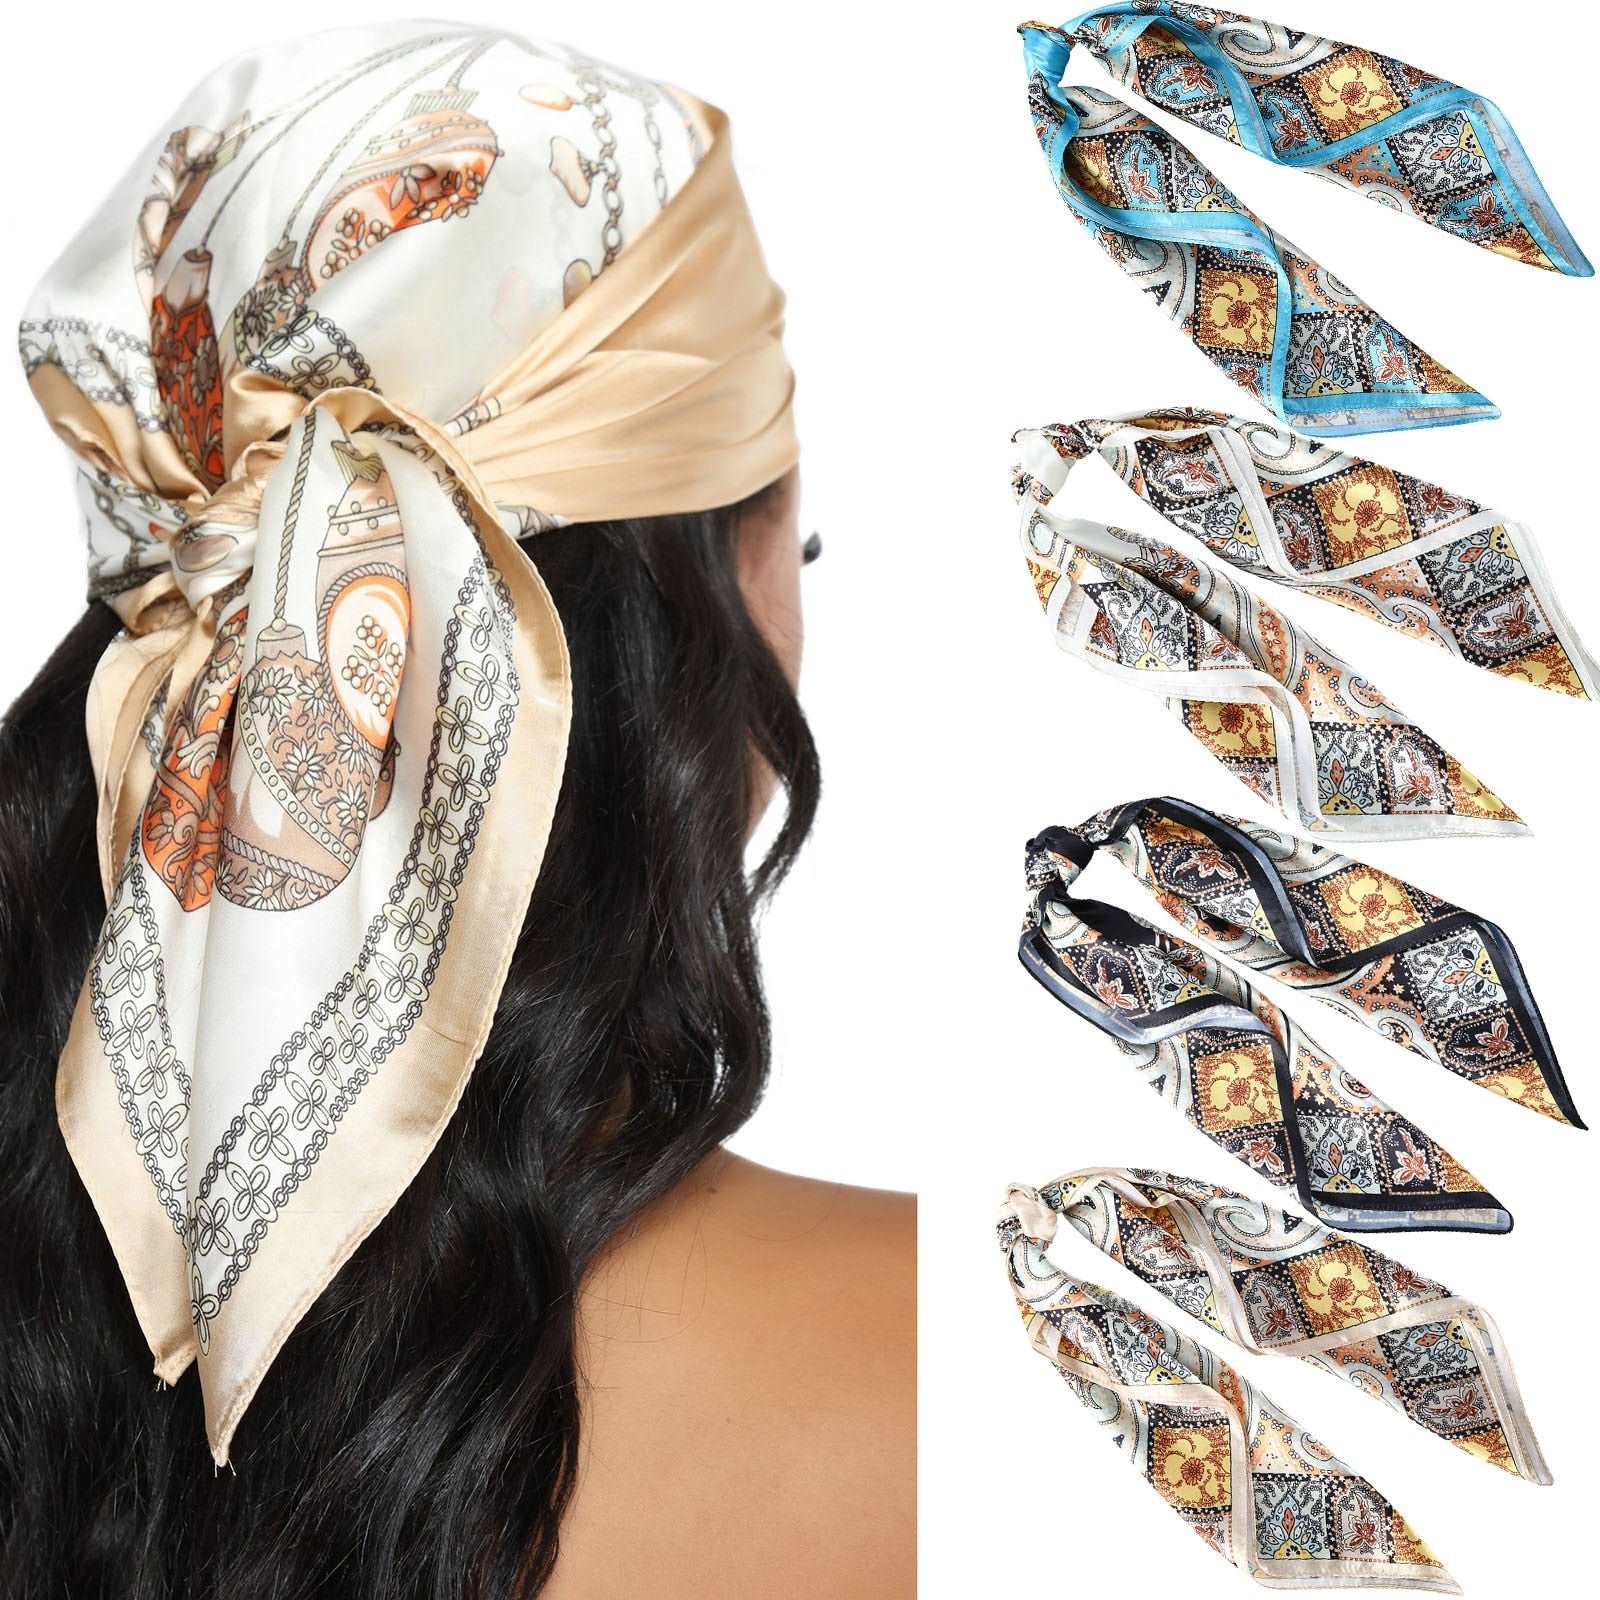 Printing Bandanas Hair Bands - Flexi Africa - Flexi Africa offers Free Delivery Worldwide - Vibrant African traditional clothing showcasing bold prints and intricate designs